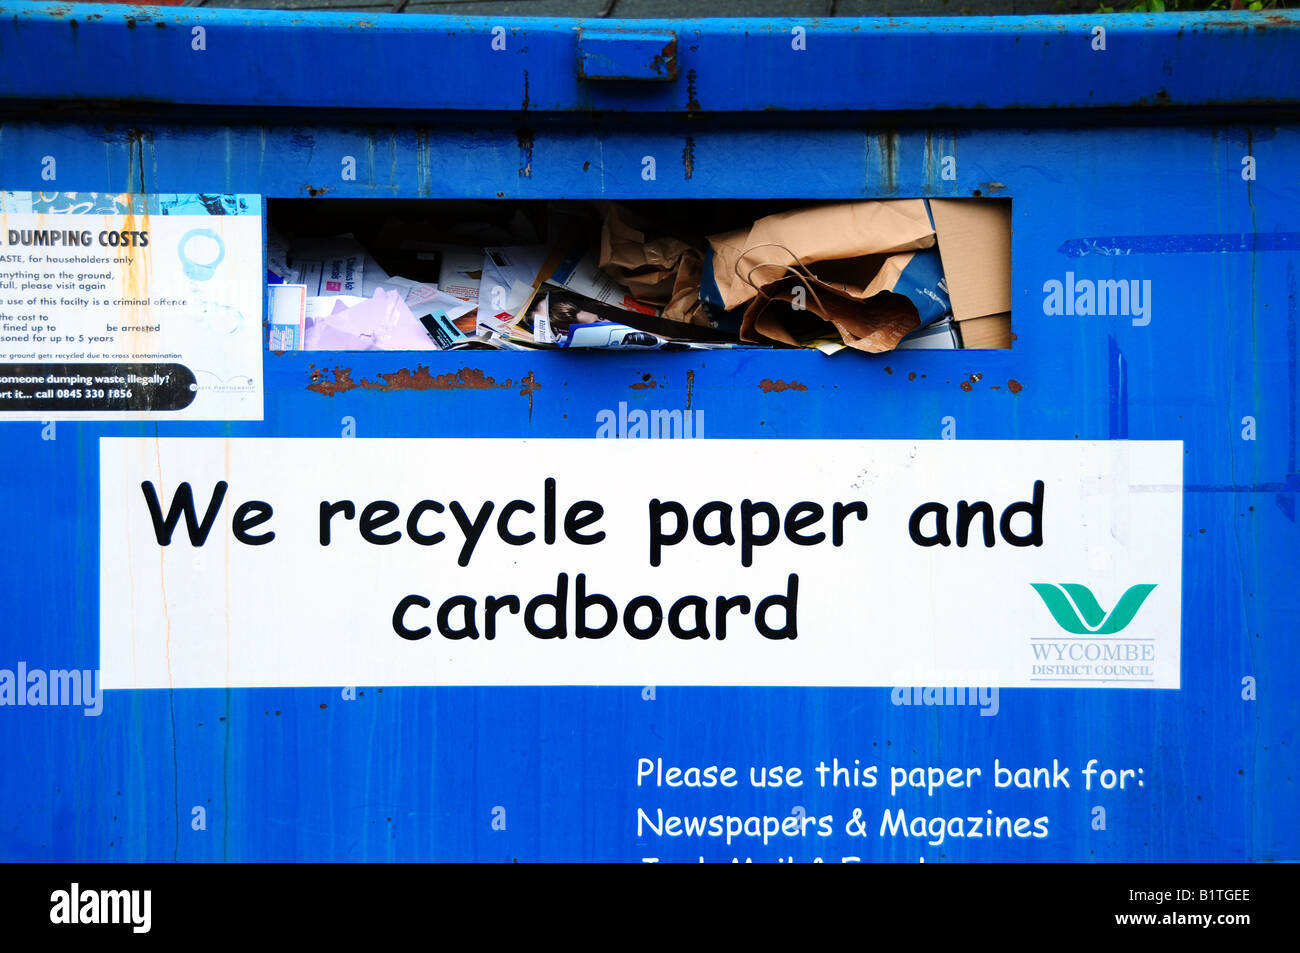 Paper and cardboard recycling bank, UK Stock Photo